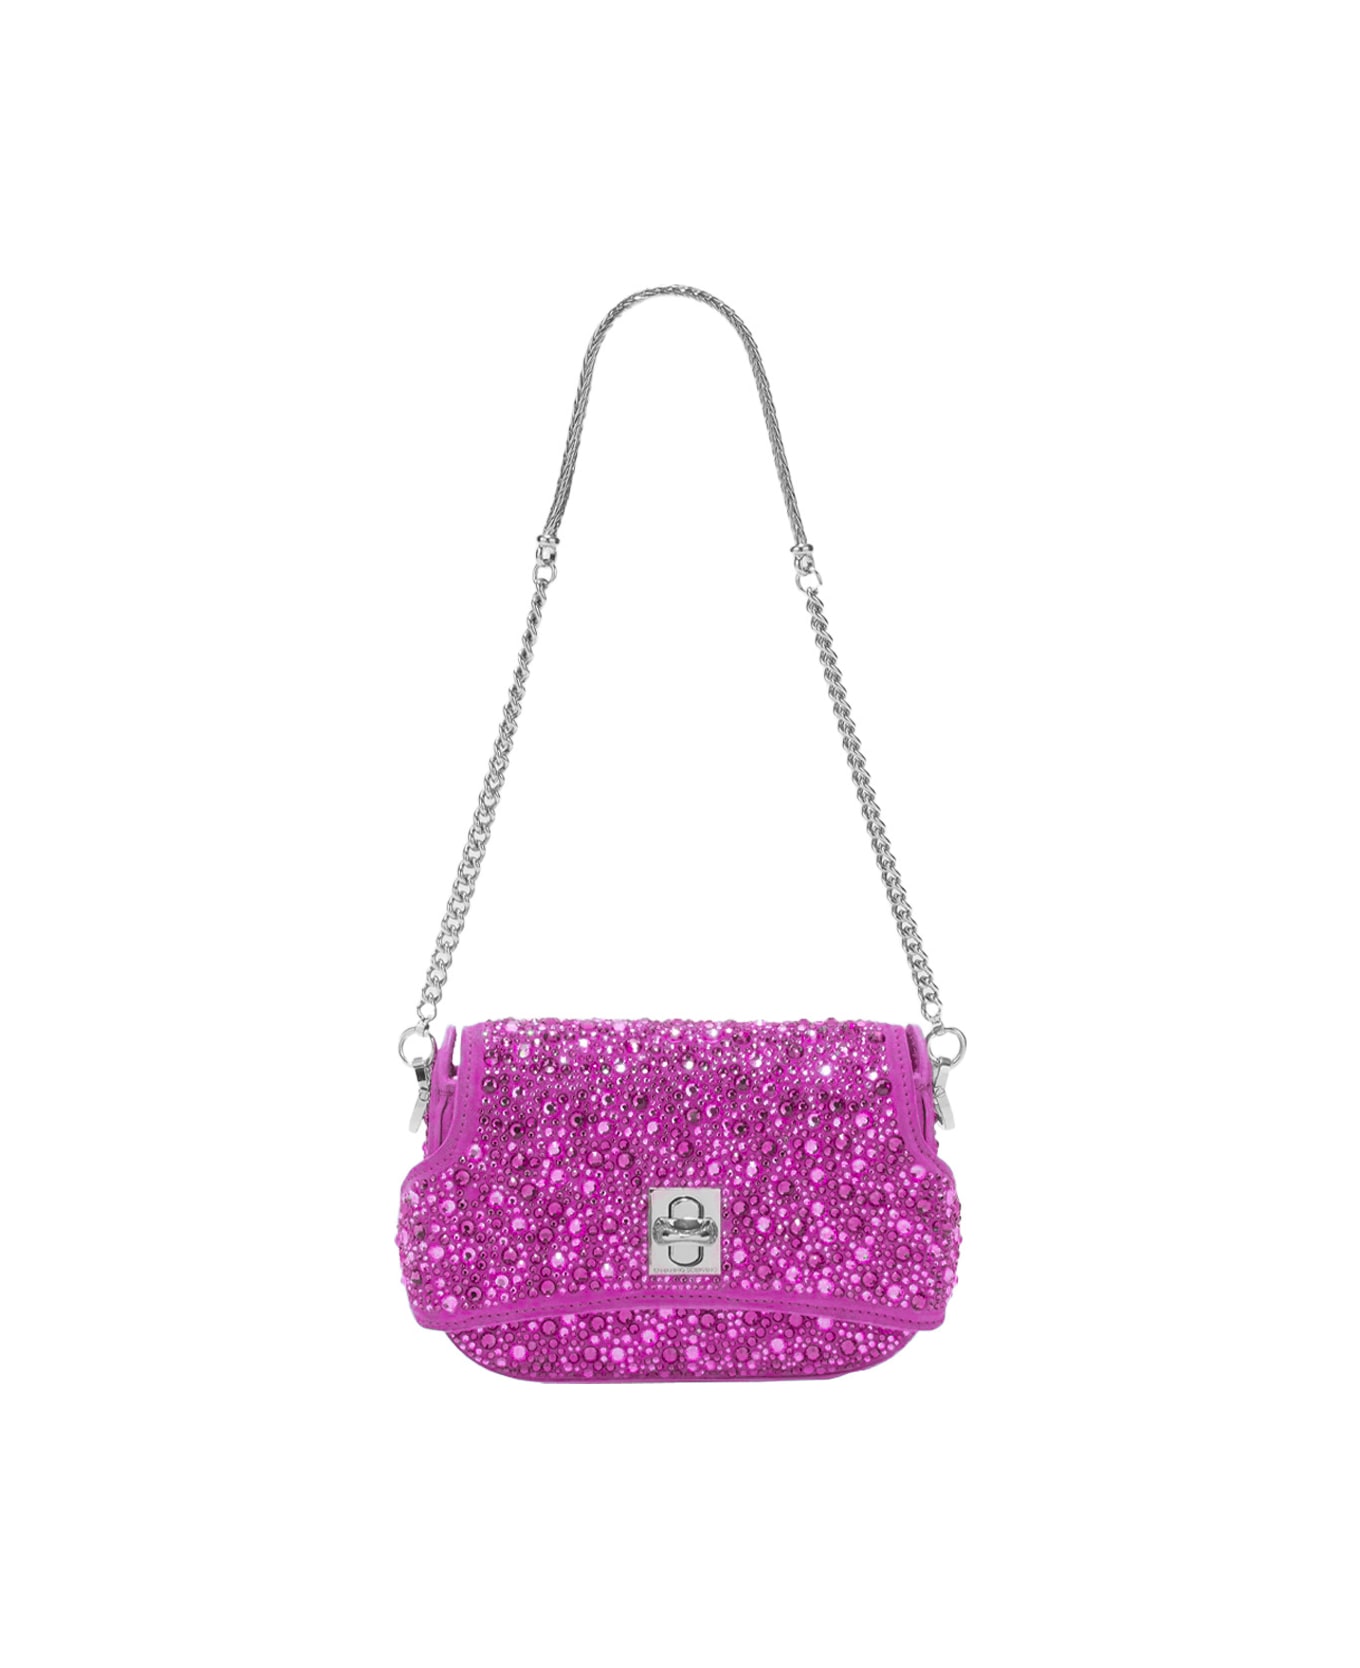 Ermanno Scervino Fuchsia Audrey Bag With Crystals - Pink ショルダーバッグ